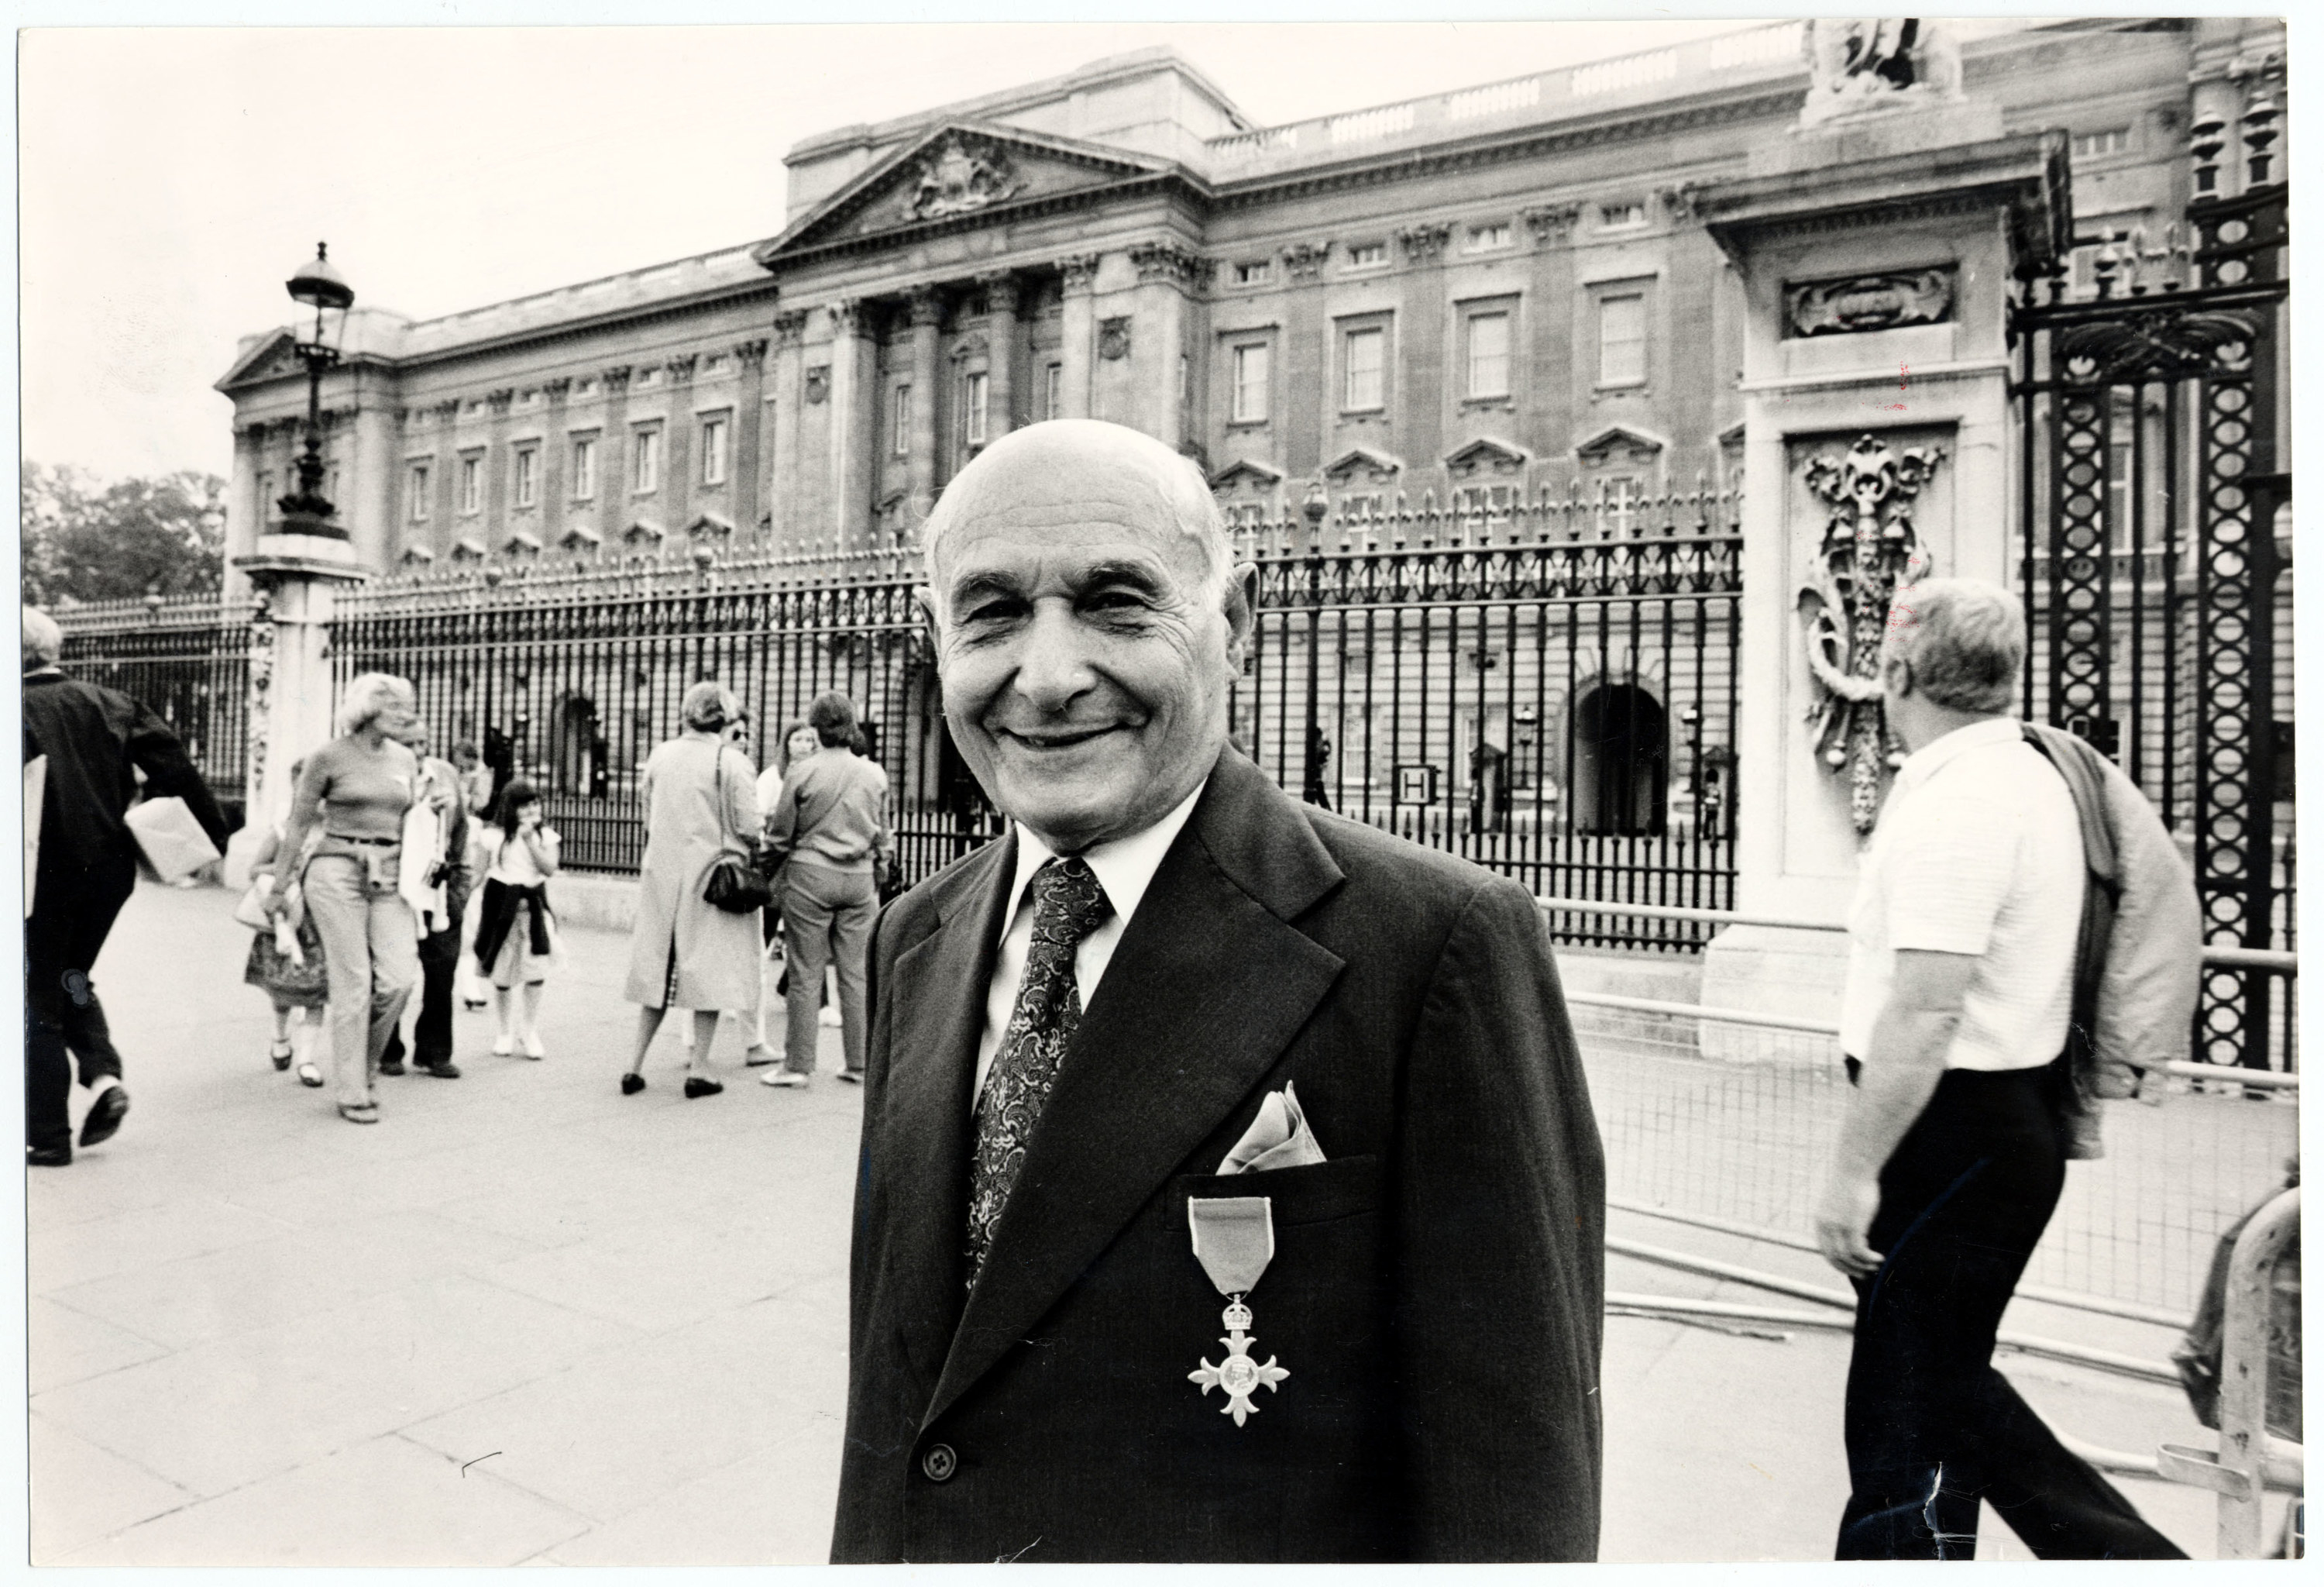 Juan Pujol García in his later years standing outside Buckingham Palace